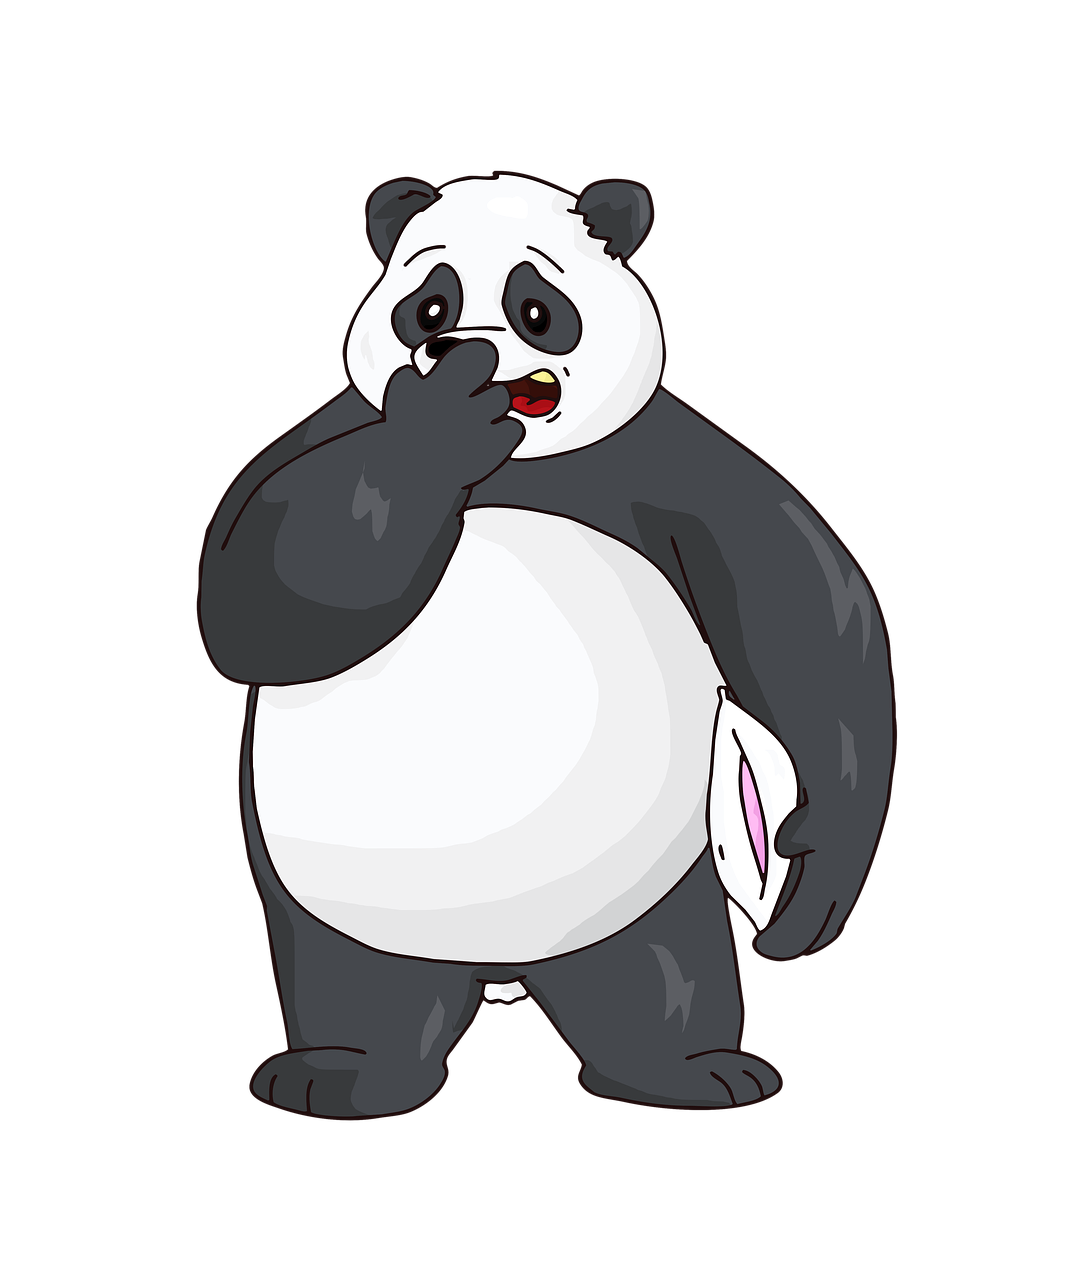 a black and white panda bear holding a surfboard, an illustration of, inspired by Luo Ping, shutterstock, on a flat color black background, cartoon style illustration, she has a jiggly fat round belly, high detail illustration